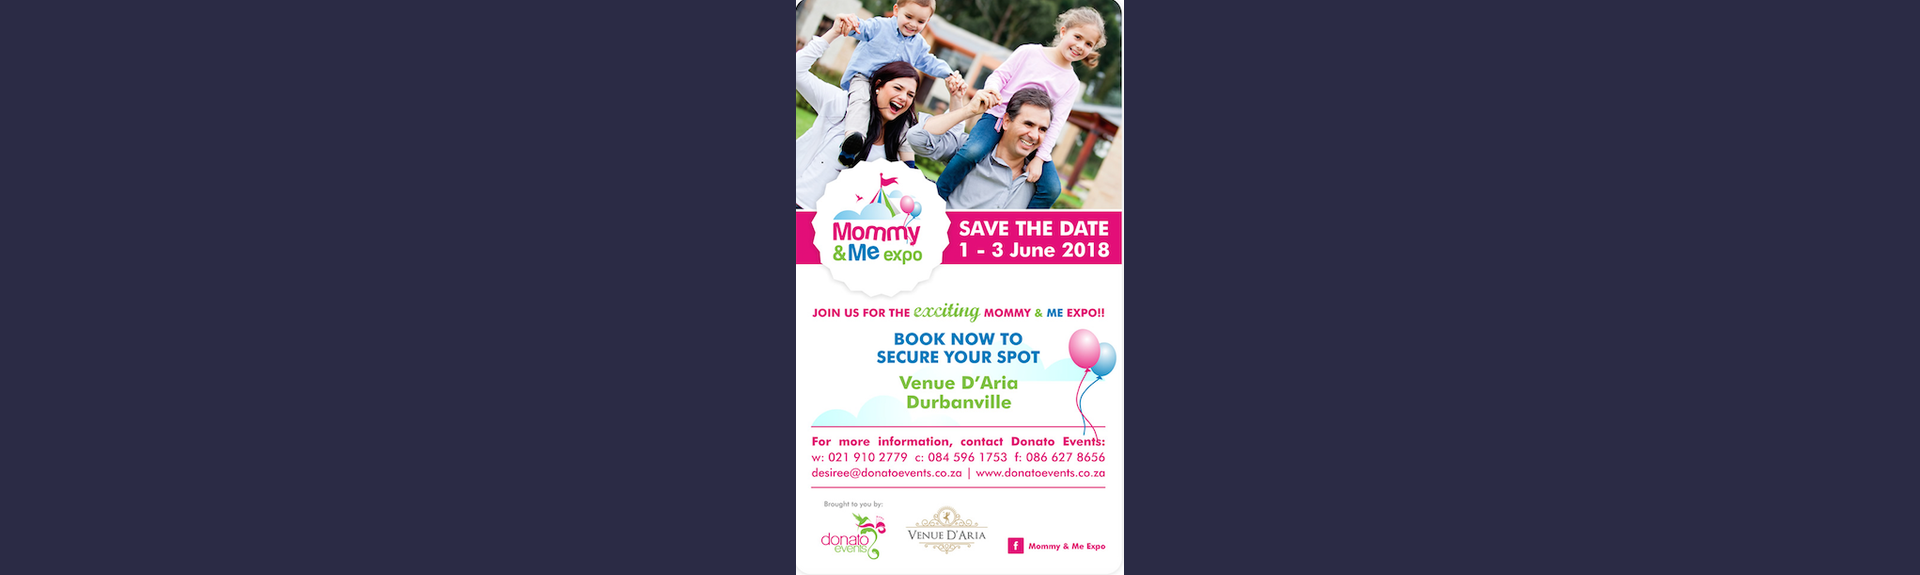 Mommy and Me Expo at D'Aria, Durbanville